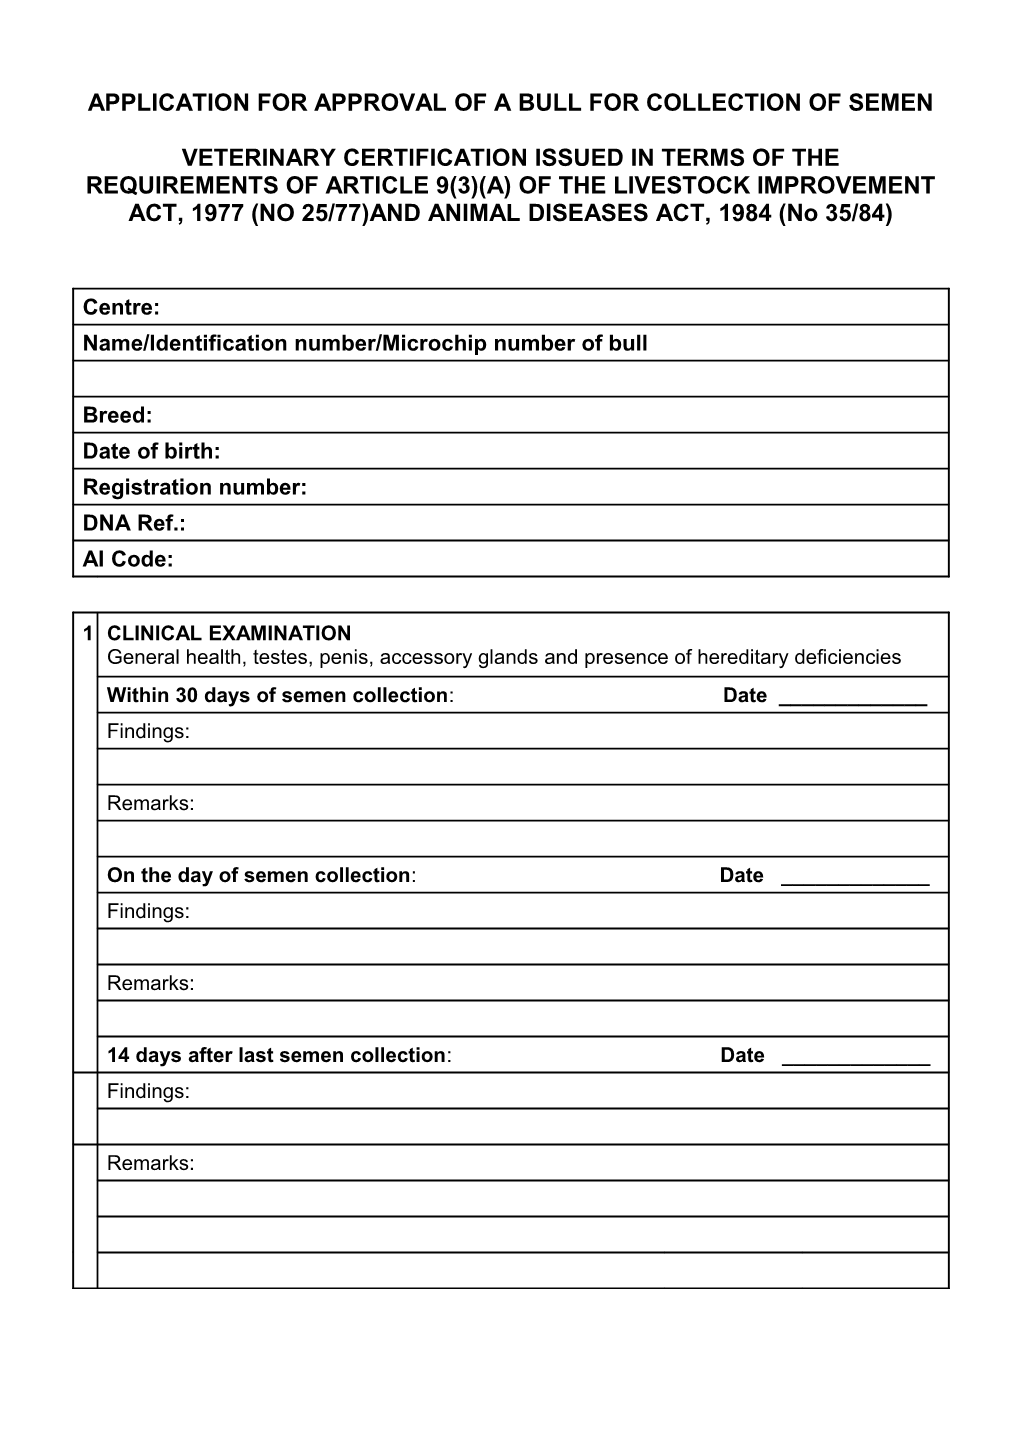 Application for Approval of a Bull for Collection of Semen